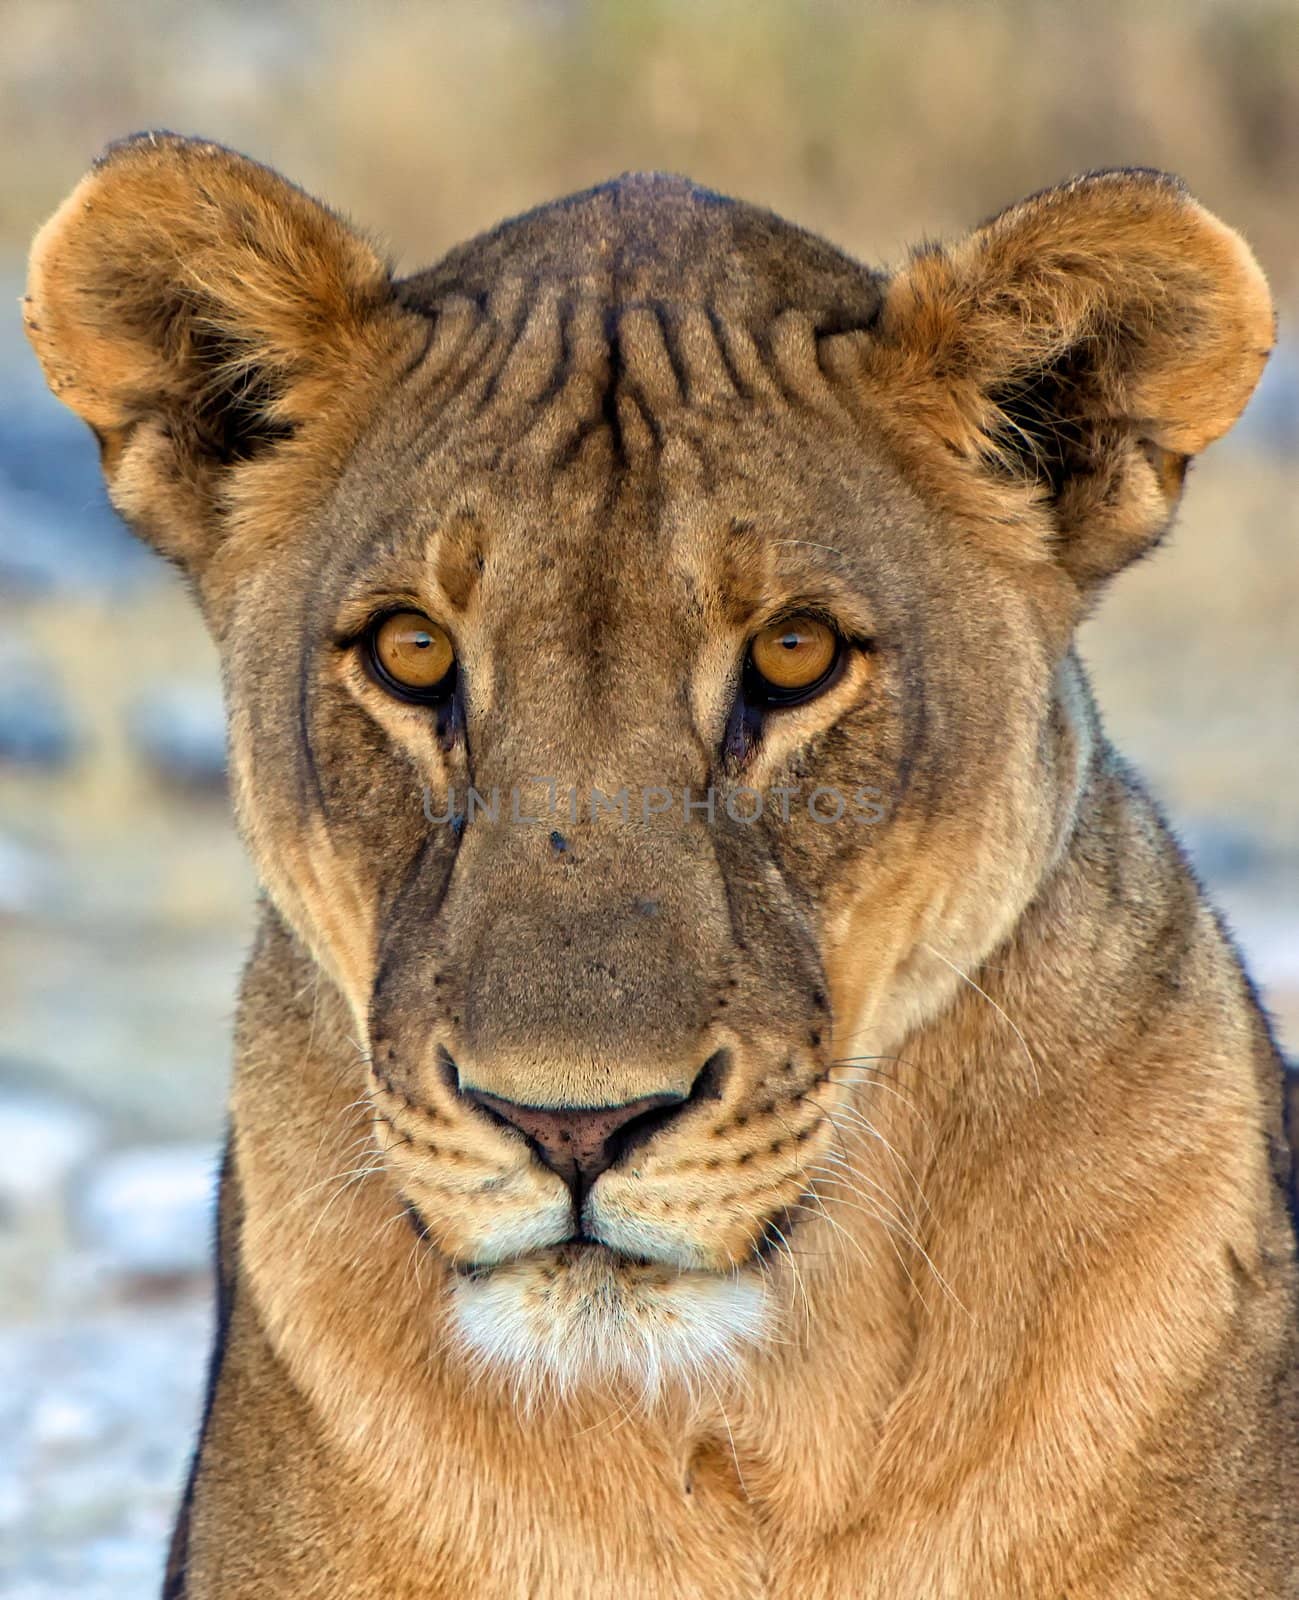 face close-up of a lion in etosha national park namibia africa